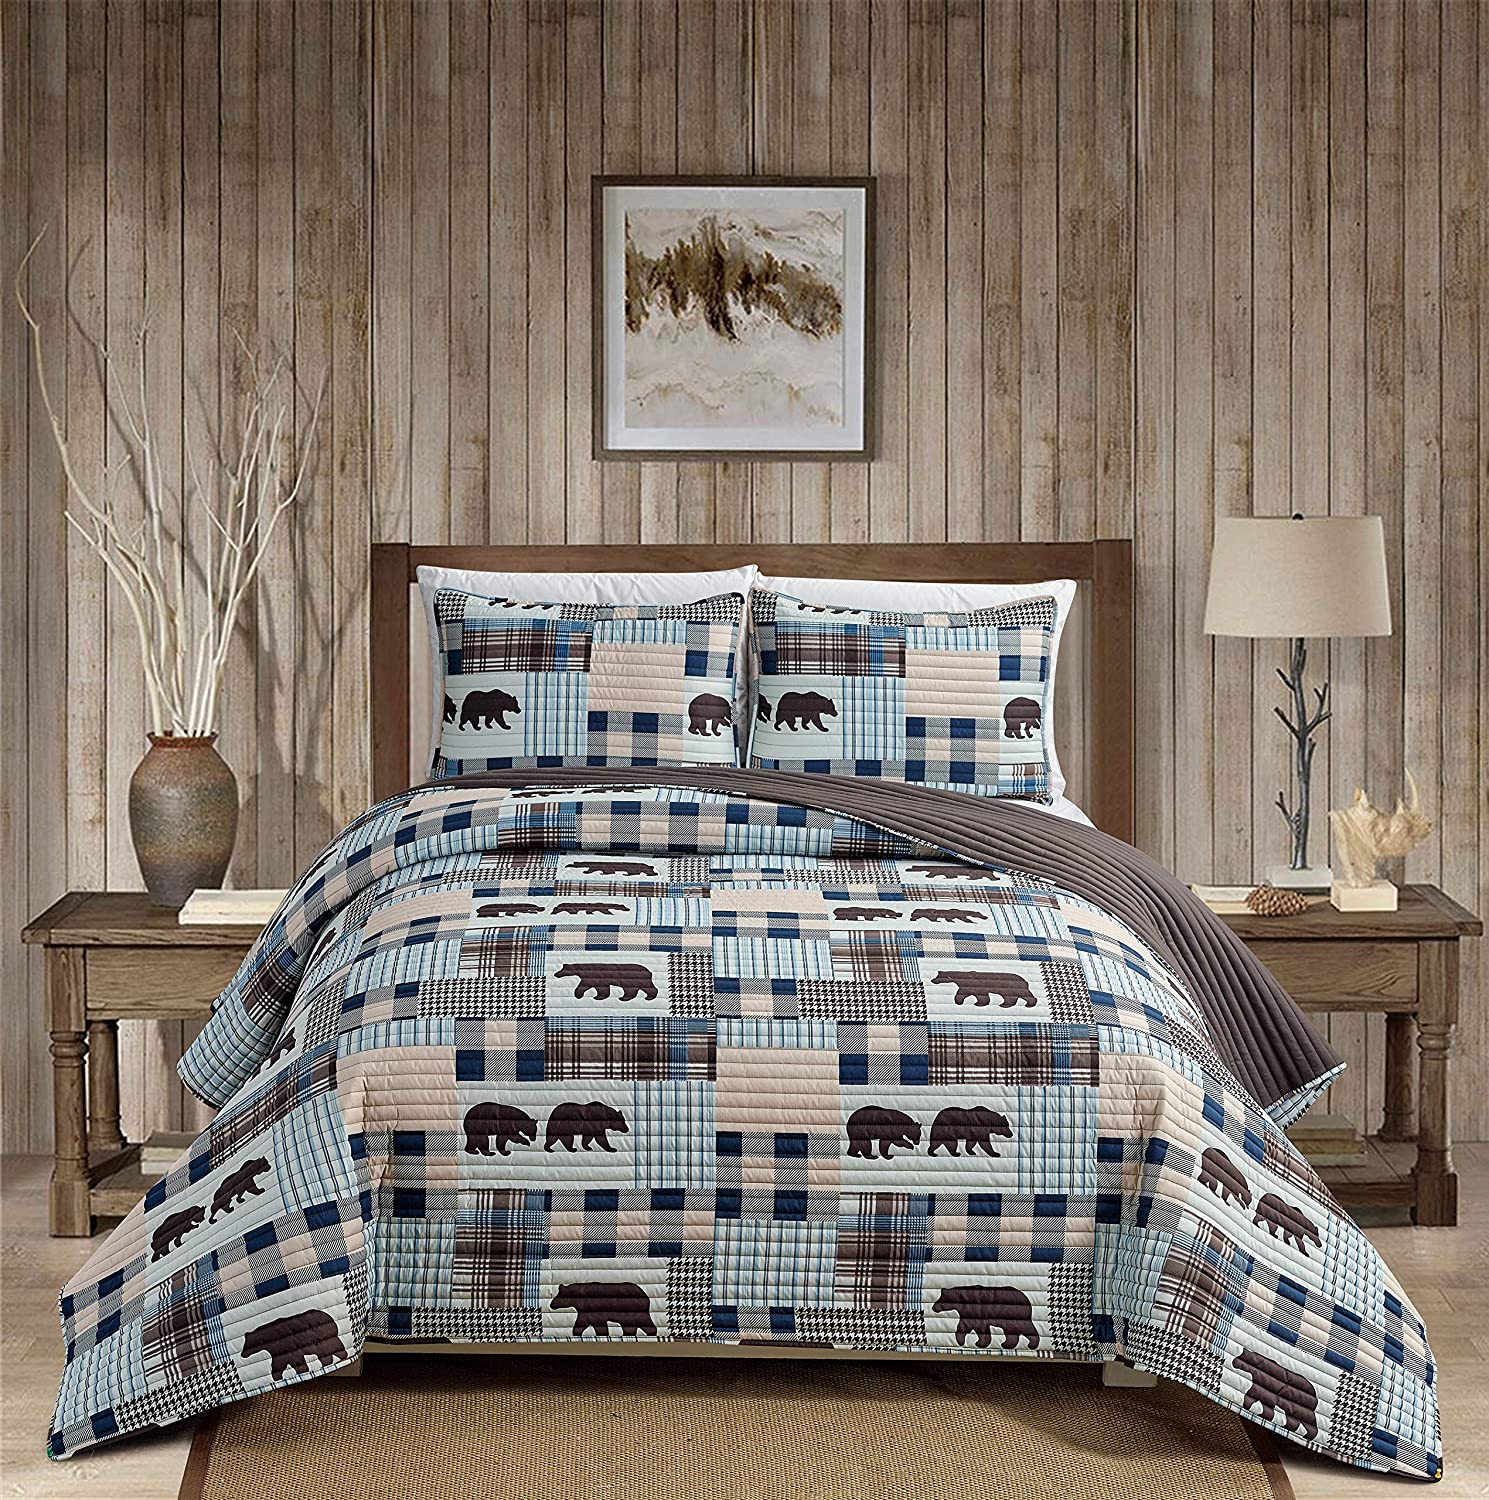 Details about   Rustic Modern Farmhouse Cabin Lodge Quilted Bedspread Coverlet Bedding Set with